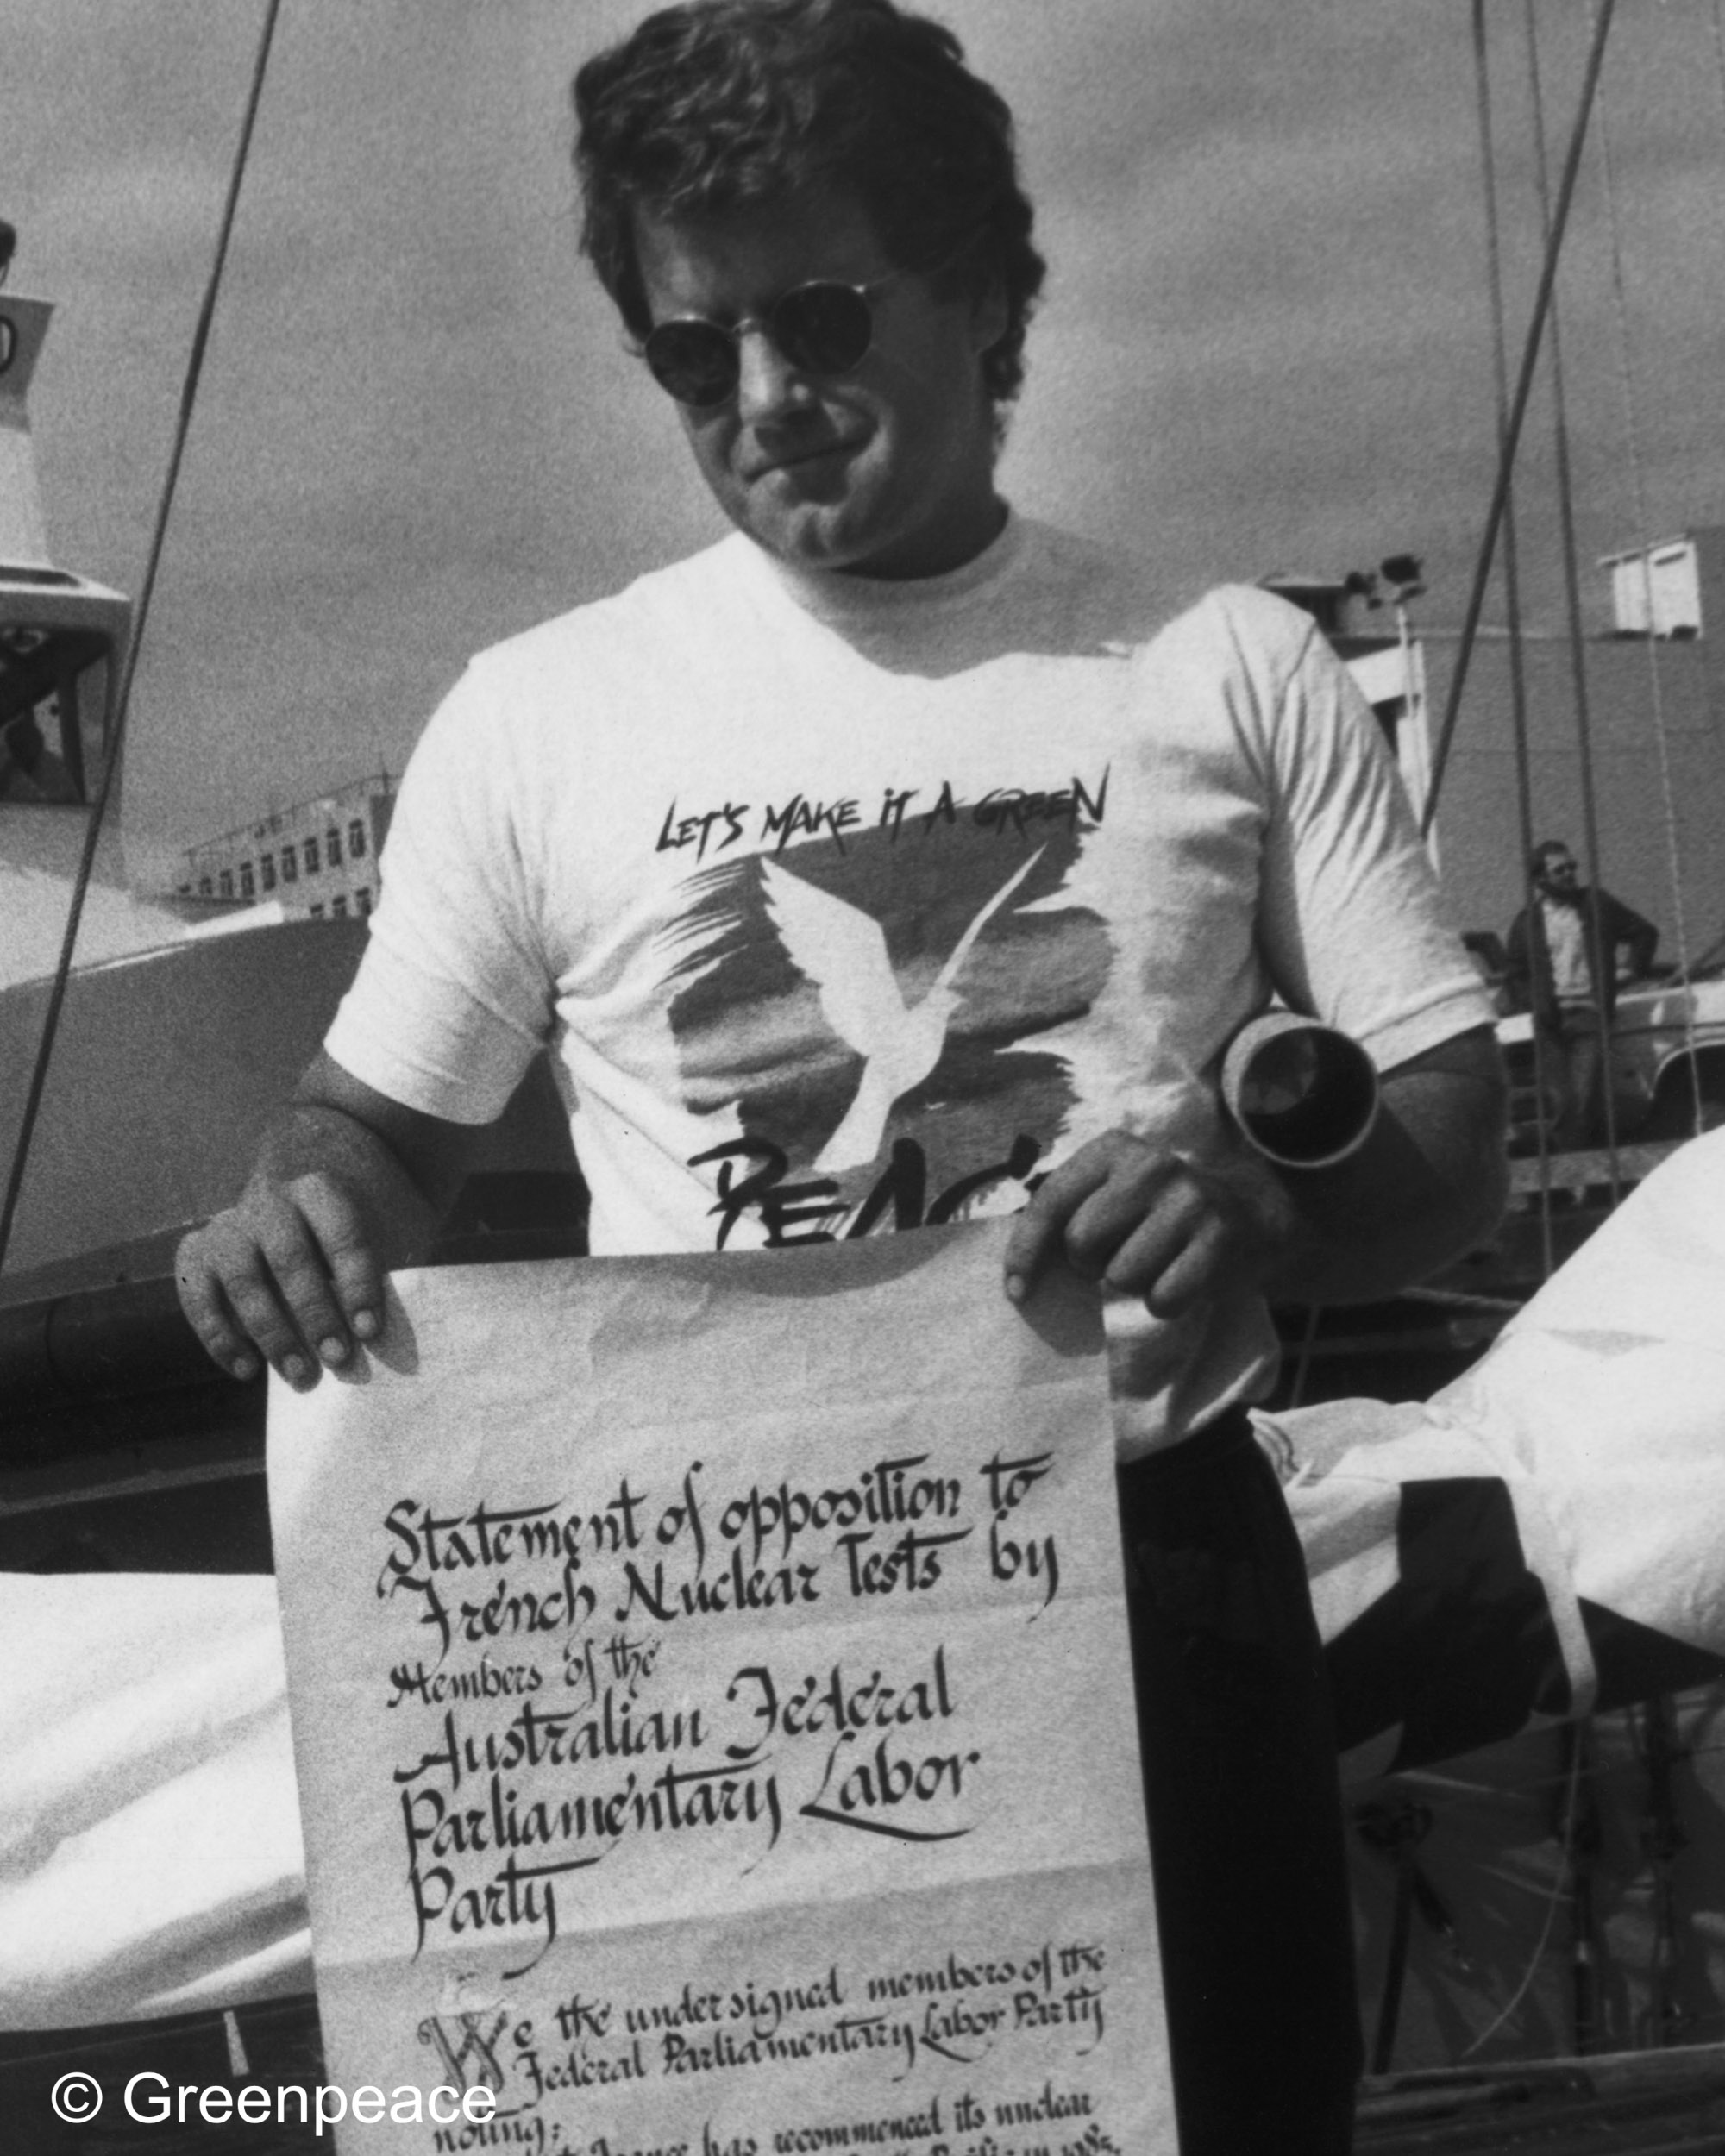 Peter on the Rainbow Warrior. Image courtesy of Greenpeace.